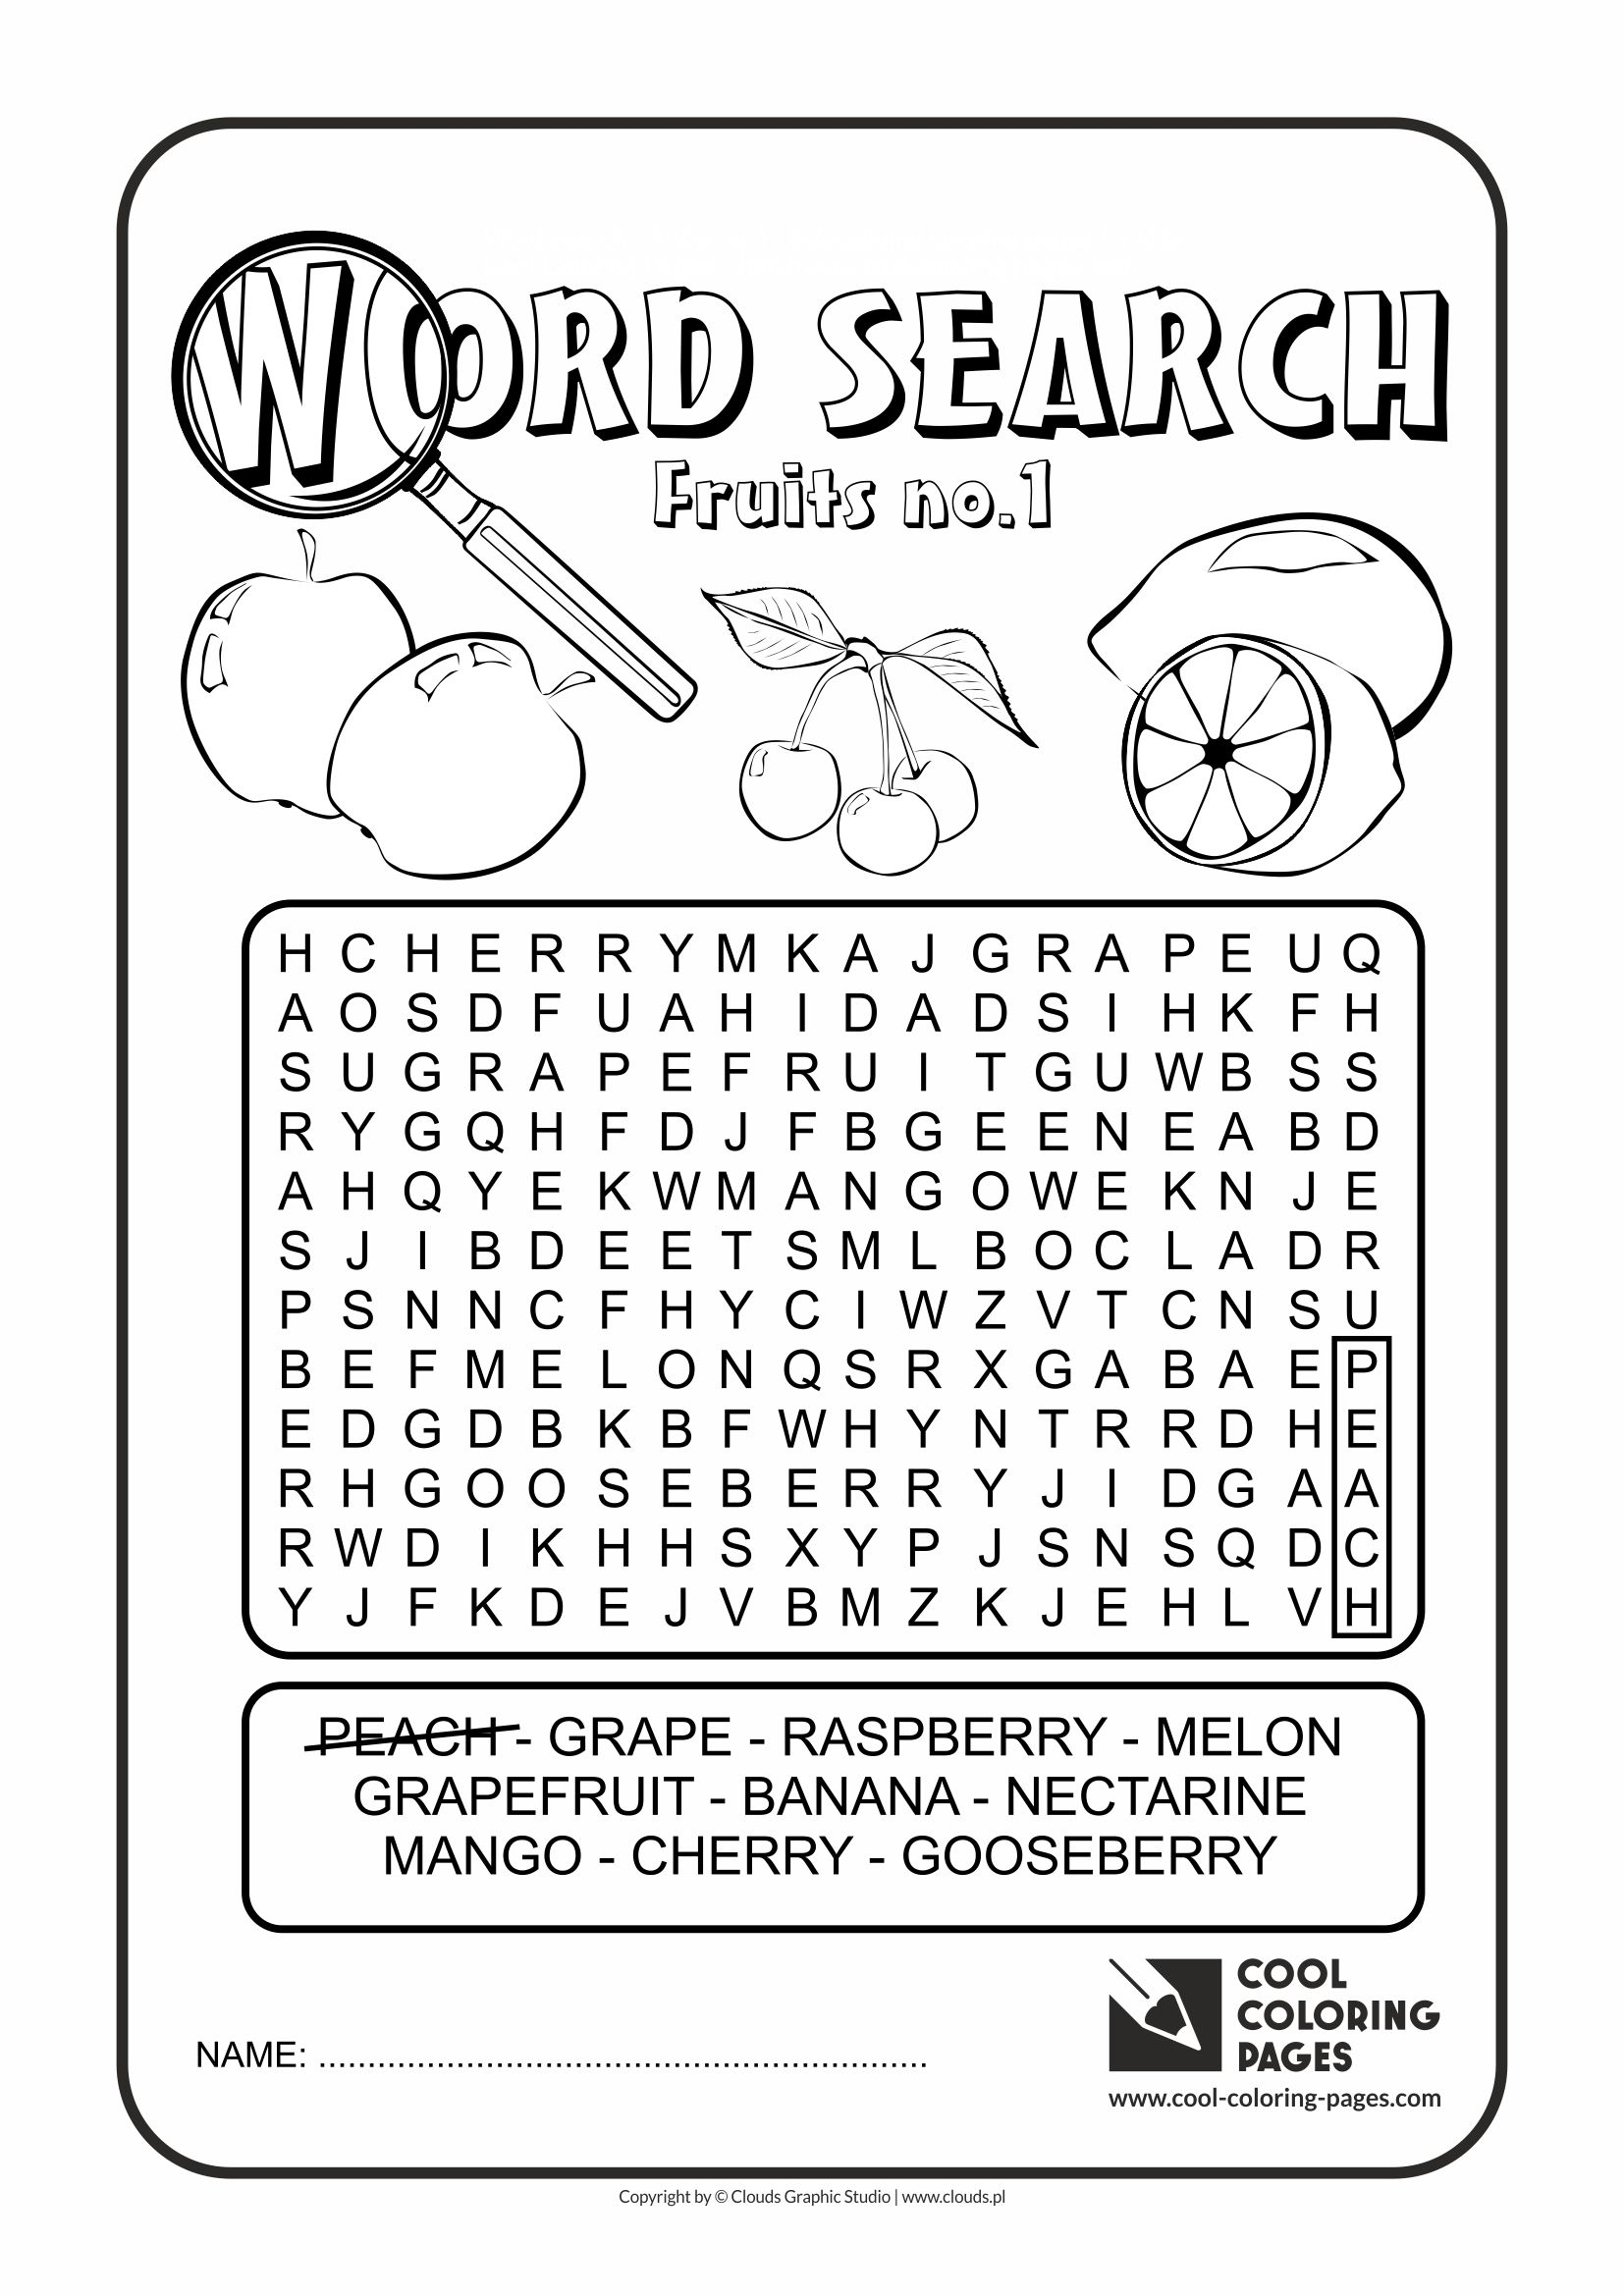 Word Search Coloring Pages To Print Cool Coloring Pages Word Search Cool Coloring Pages Free